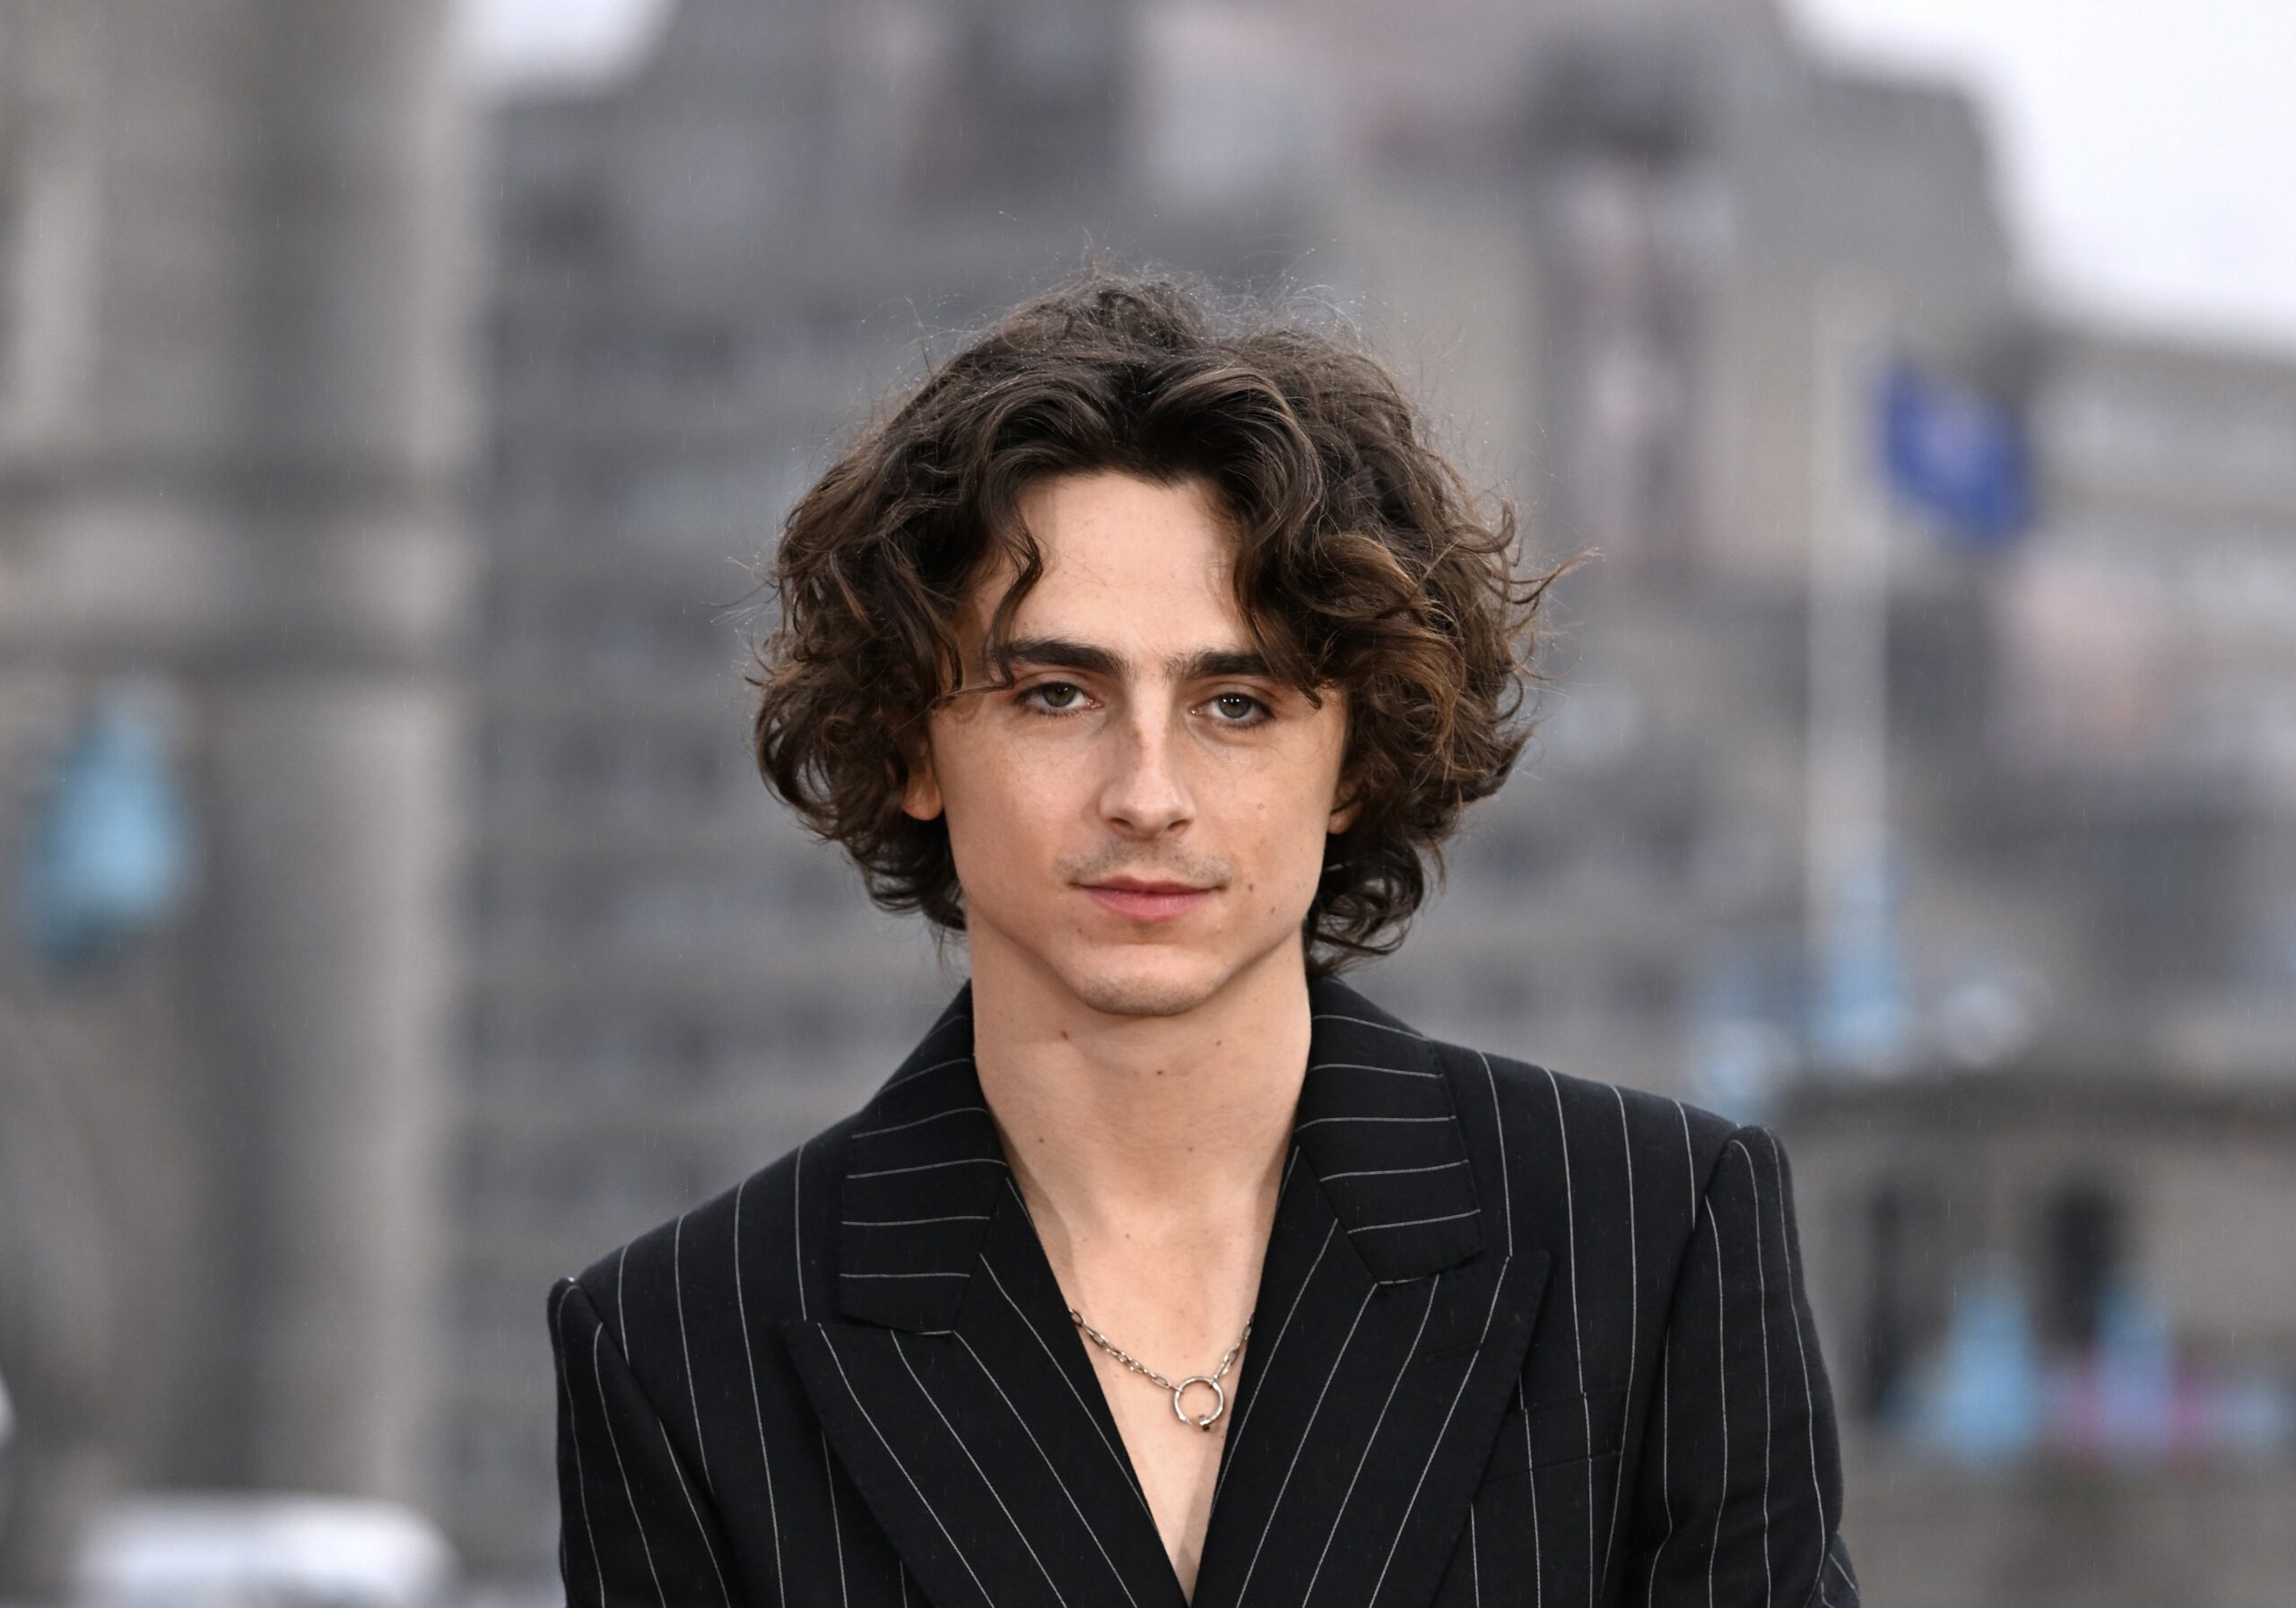 At the 'Wonka' photocall in London, Timothée Chalamet commands attention in an Alexander McQueen pinstripe suit paired with statement boots, his look an artful convergence of classic tailoring and modern fashion sensibilities.